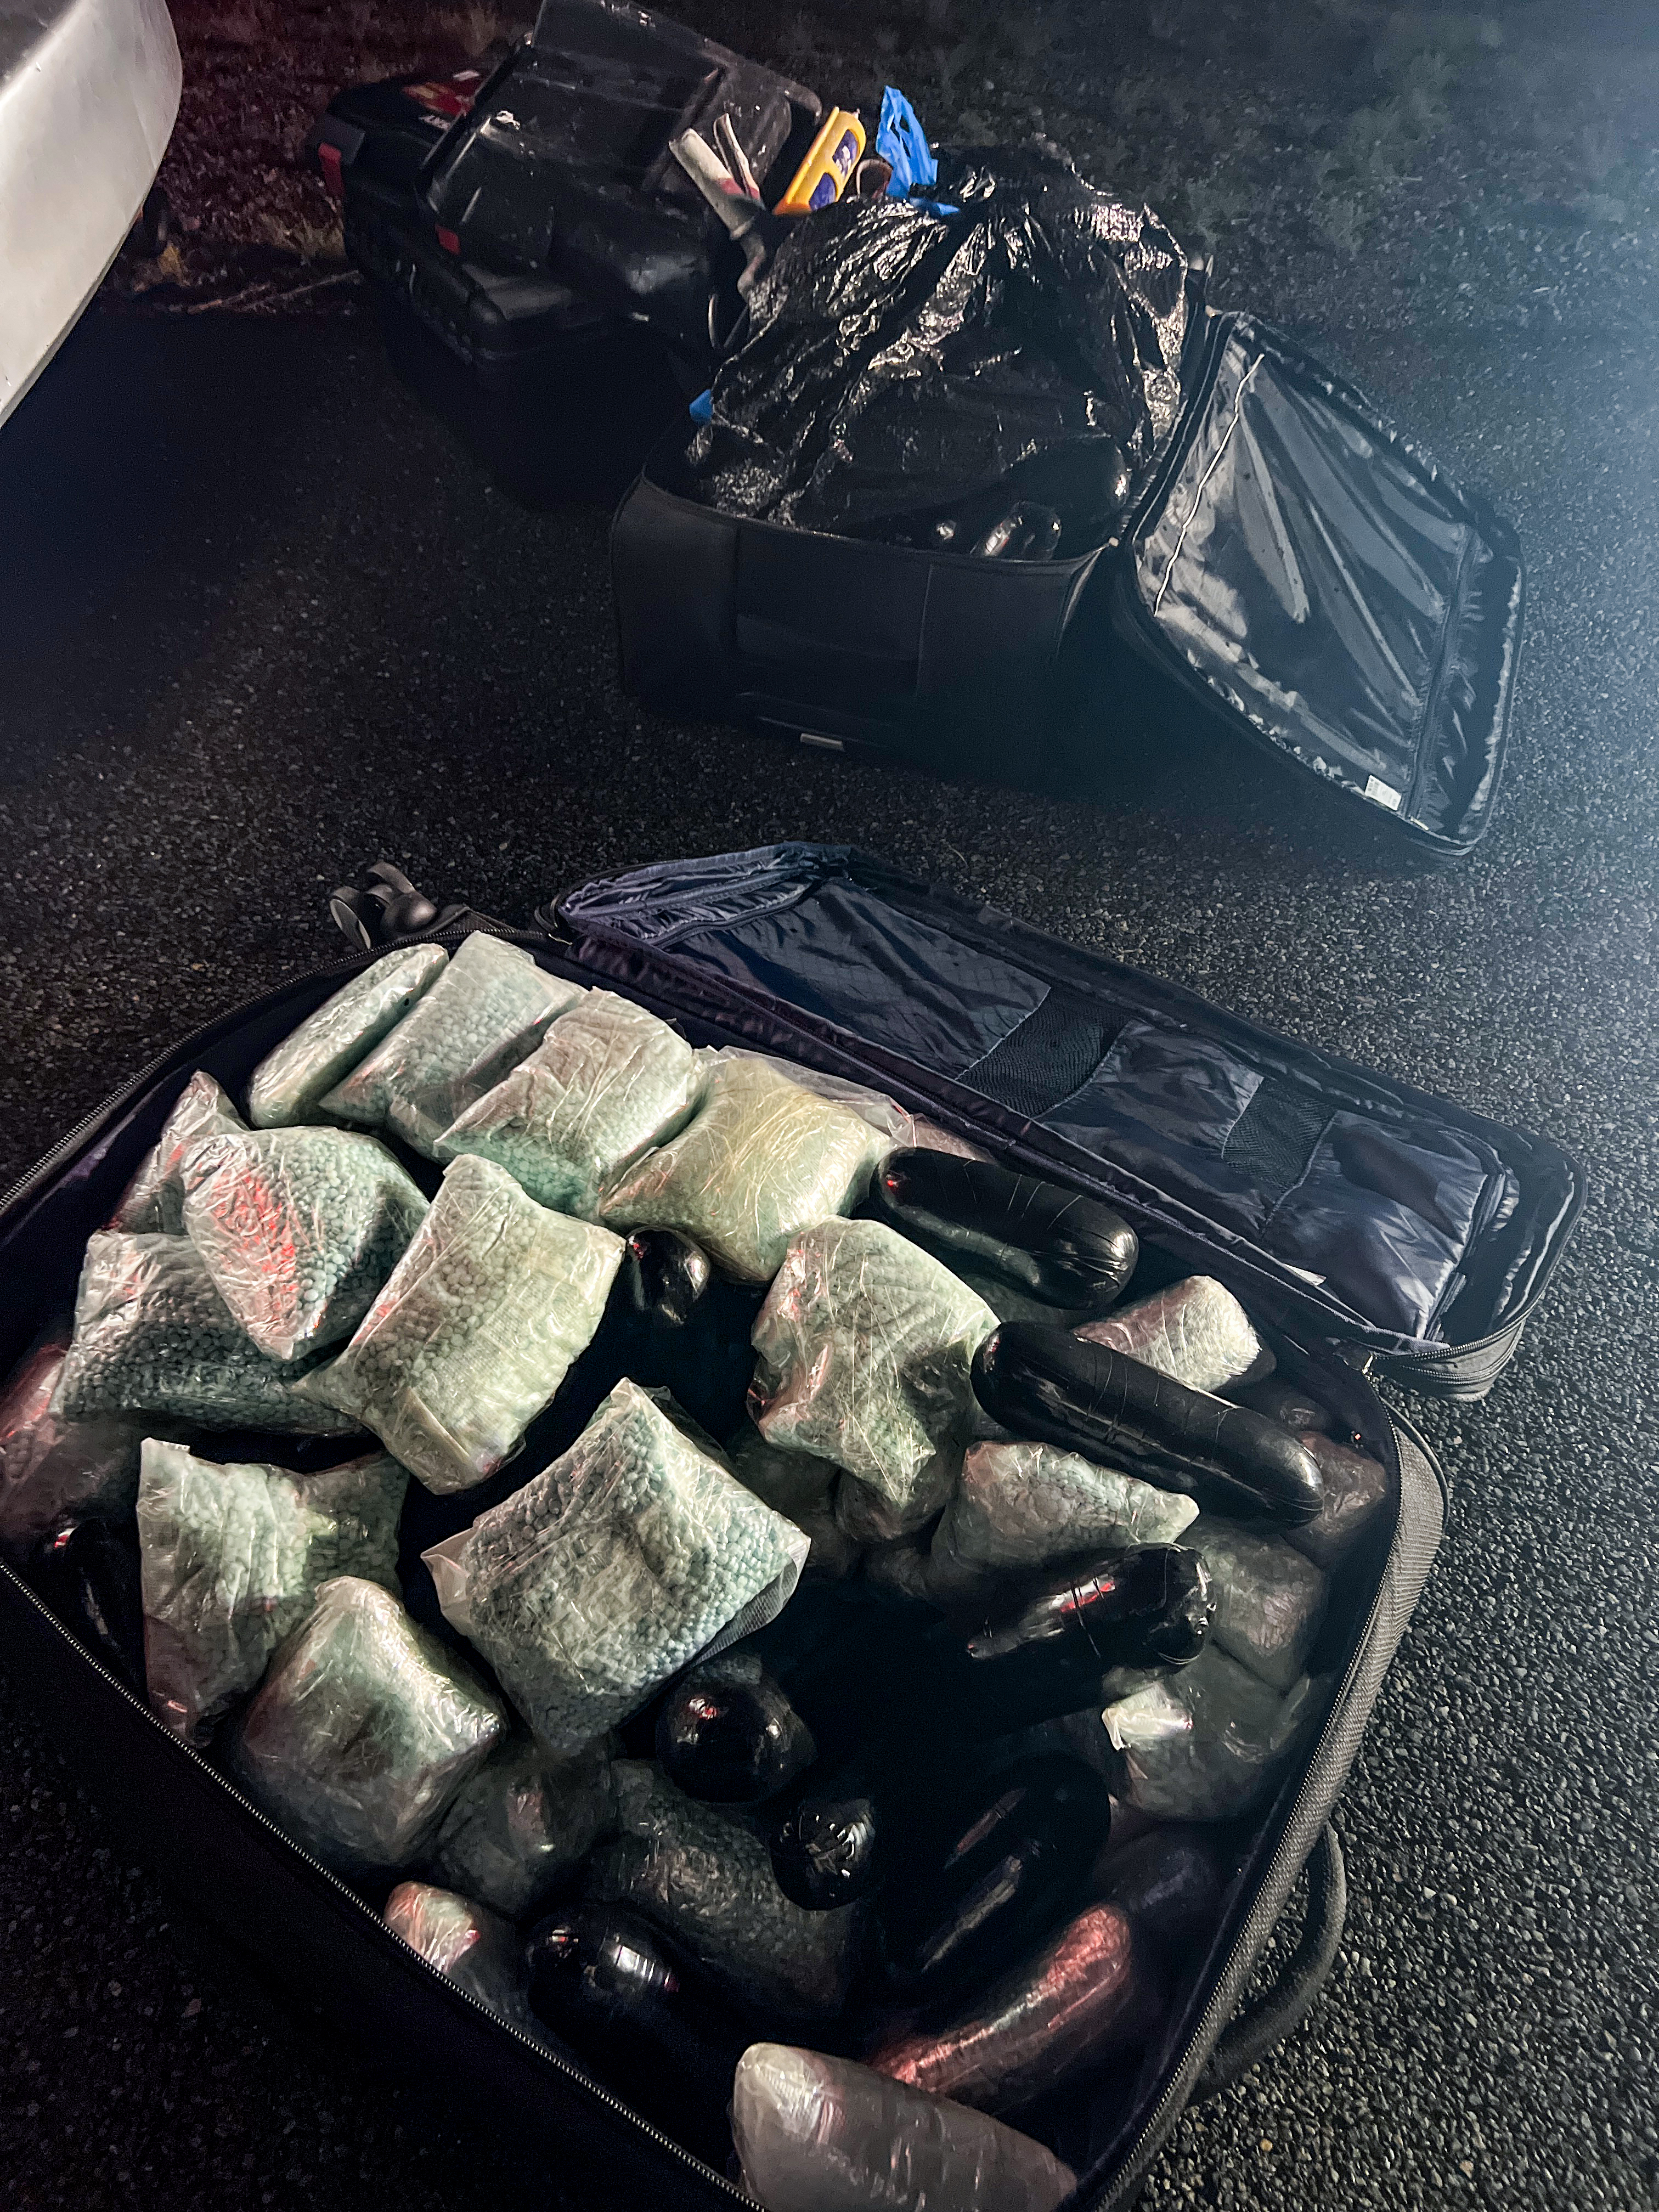 Overhead view of open luggage full of wrapped bundles of drugs 